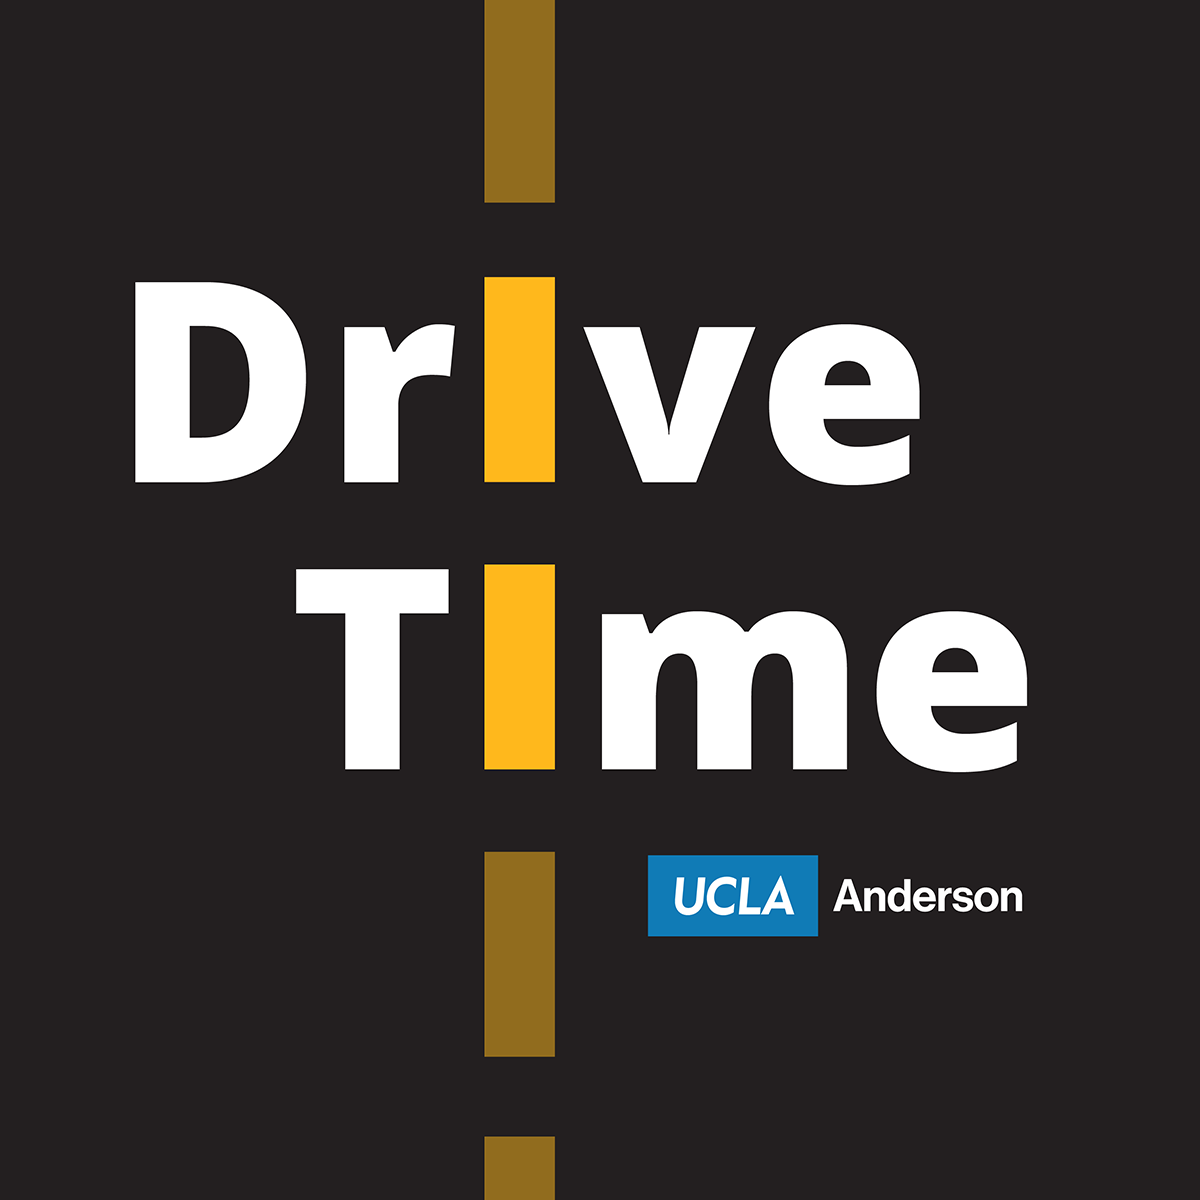 Drive Time - UCLA Anderson